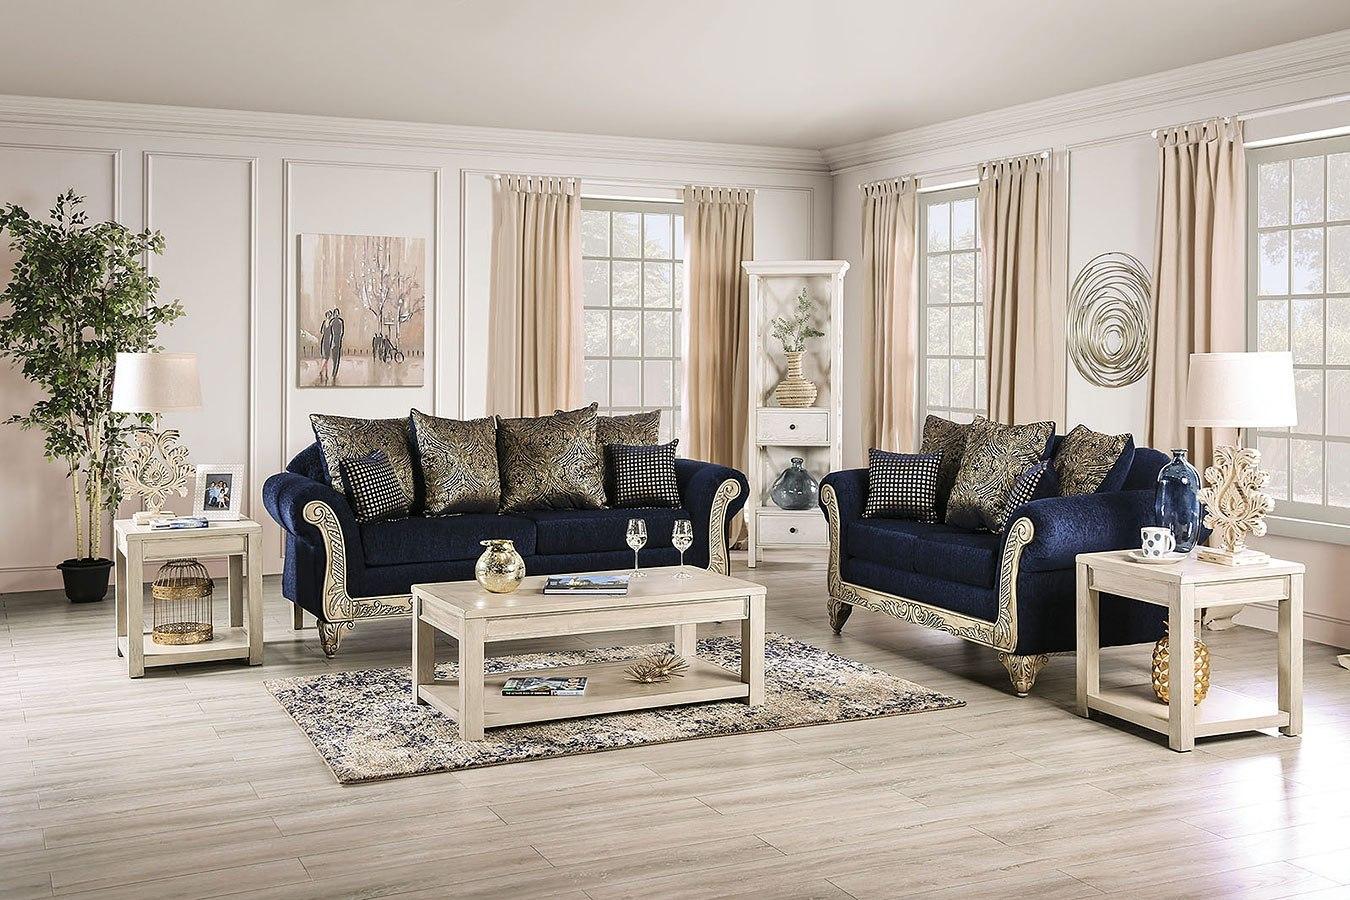 Esofastore Contemporary 2pc Sofa Set Comfortable Sofa Loveseat Navy Blue  Blended Chenille Plush Couch Pillows Living